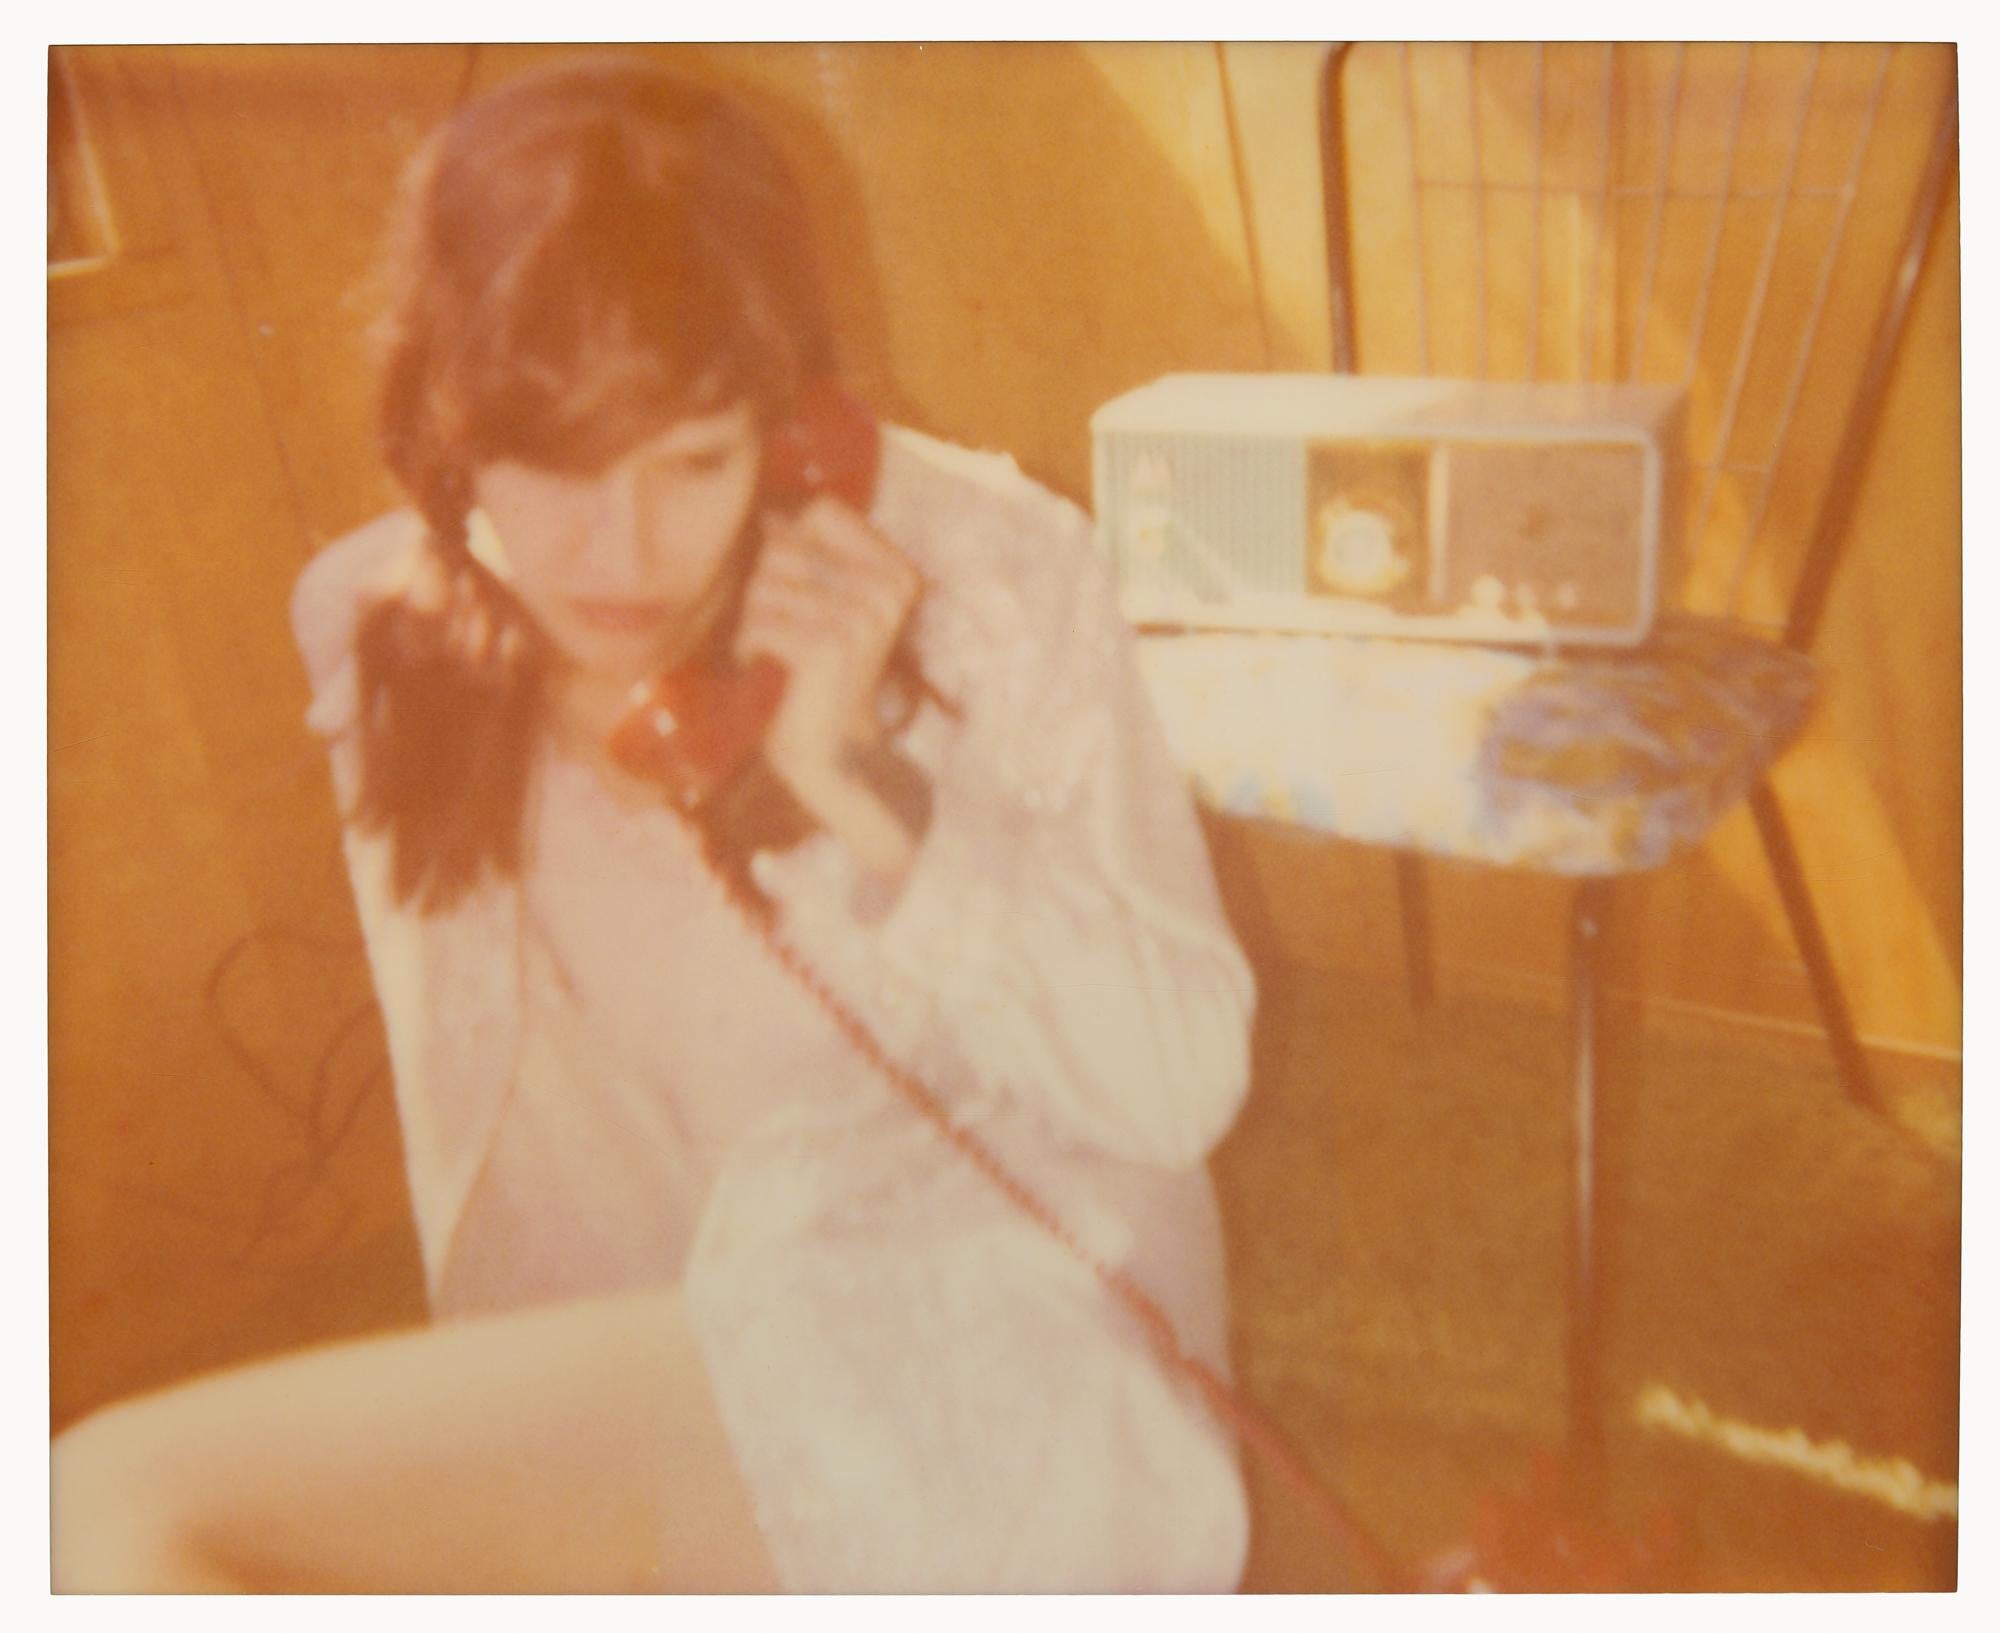 Radio Caller (The Girl behind the White Picket Fence) - Contemporary Photograph by Stefanie Schneider